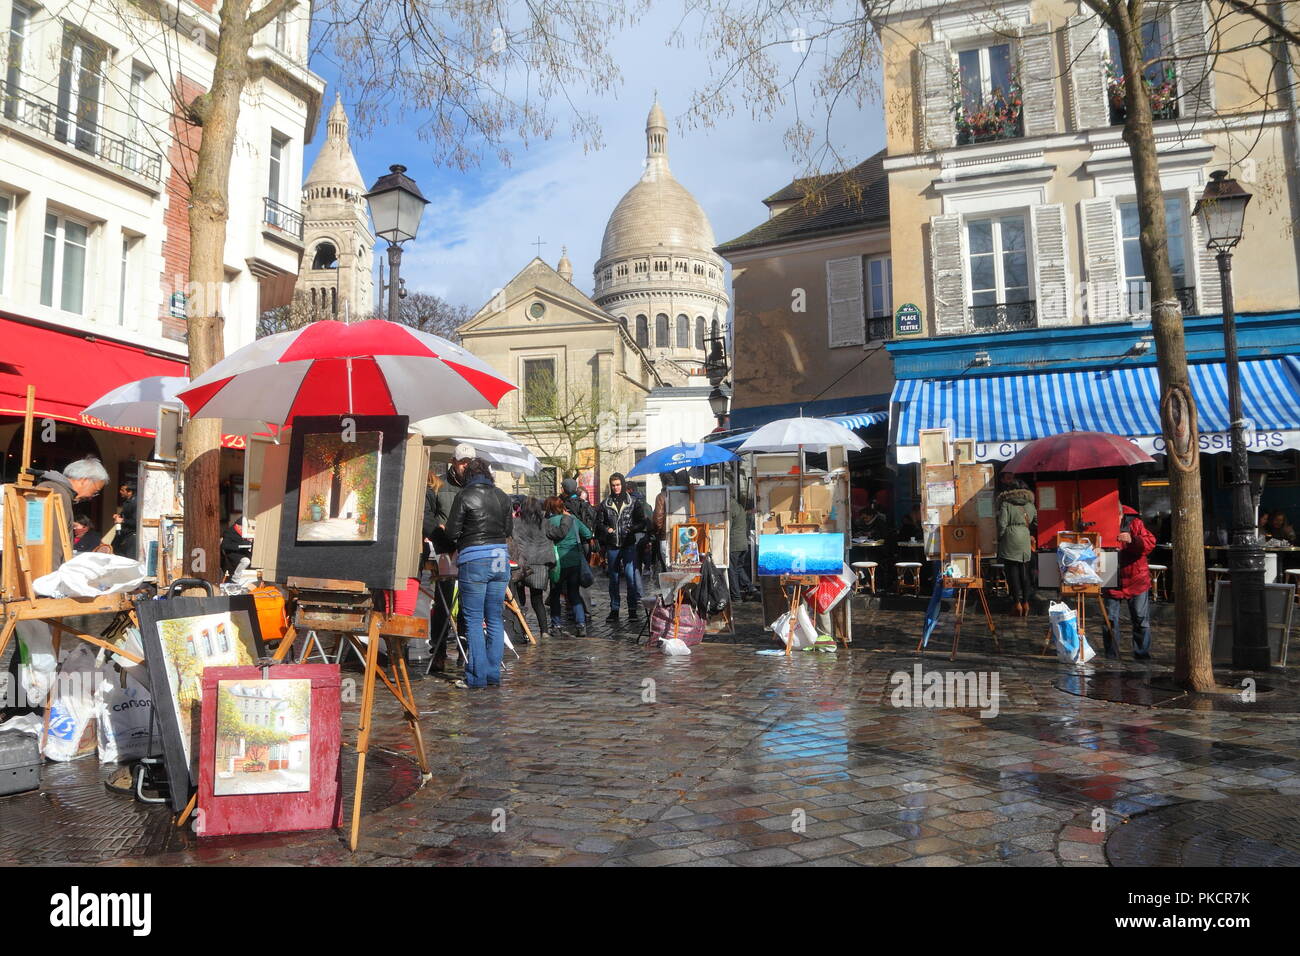 PARIS-MARCH 3: Artists artworks and easels set up in the charming Place du Tertre in Montmartre, Paris on March 3, 2014. Montmartre is one of the most Stock Photo